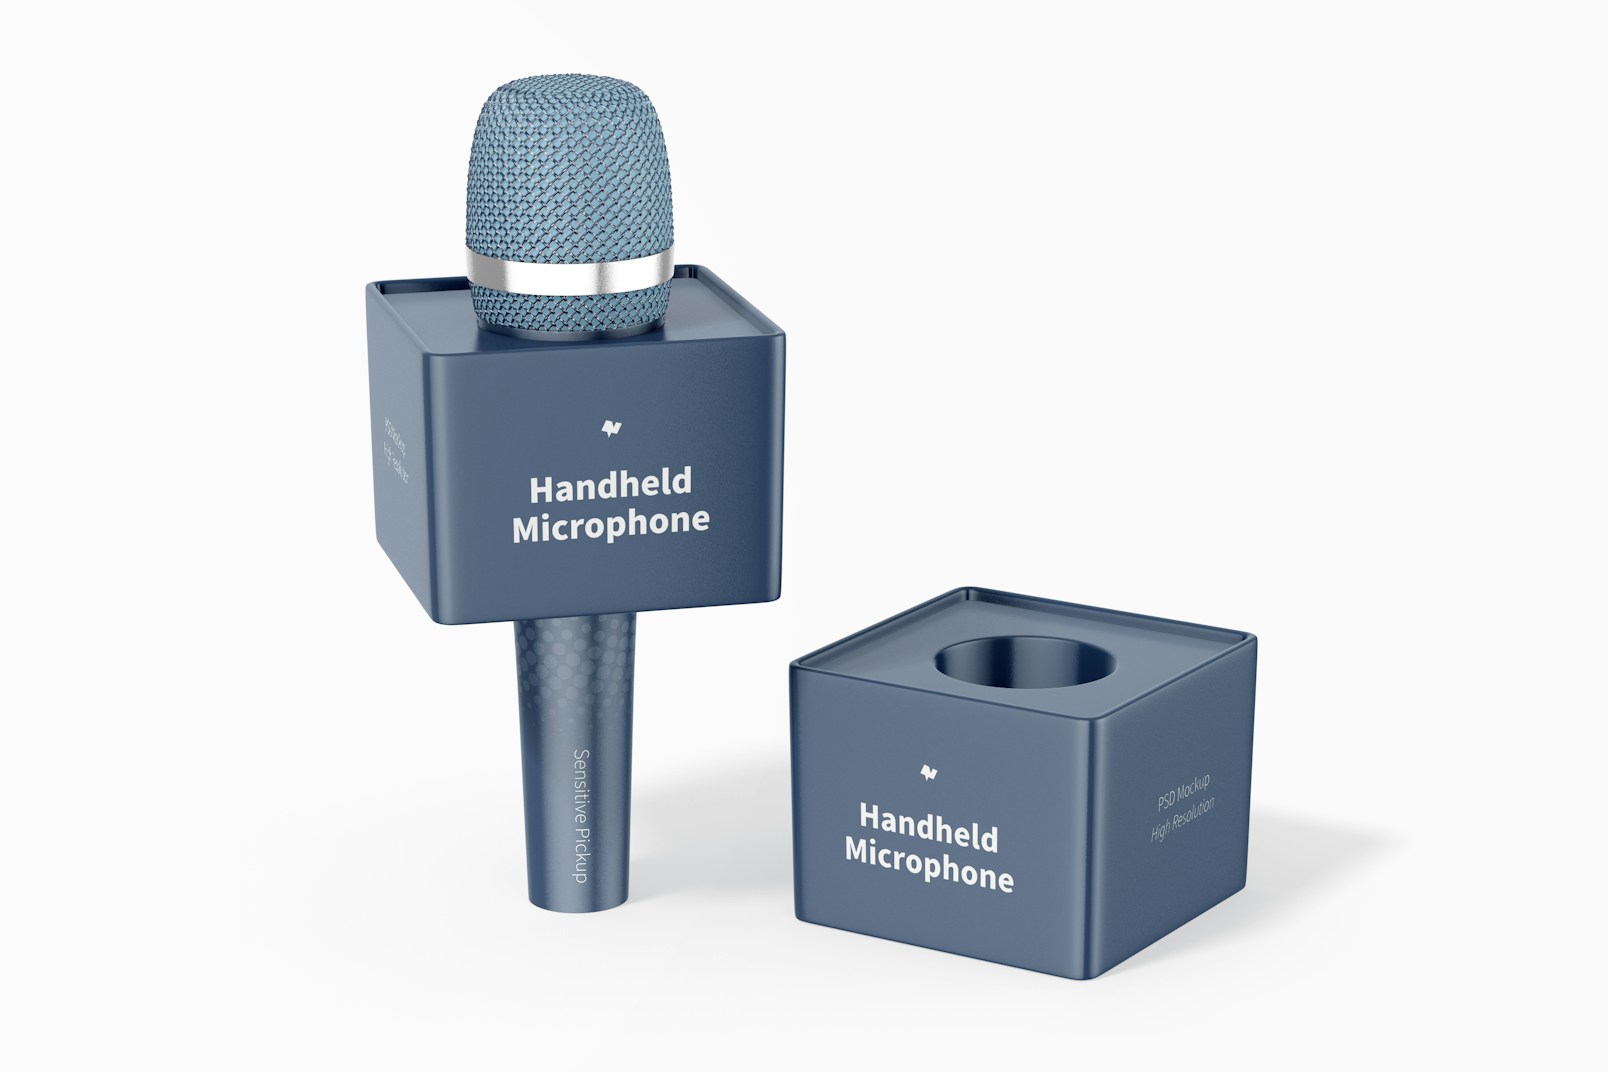 Handheld Microphone with Cube Mockup